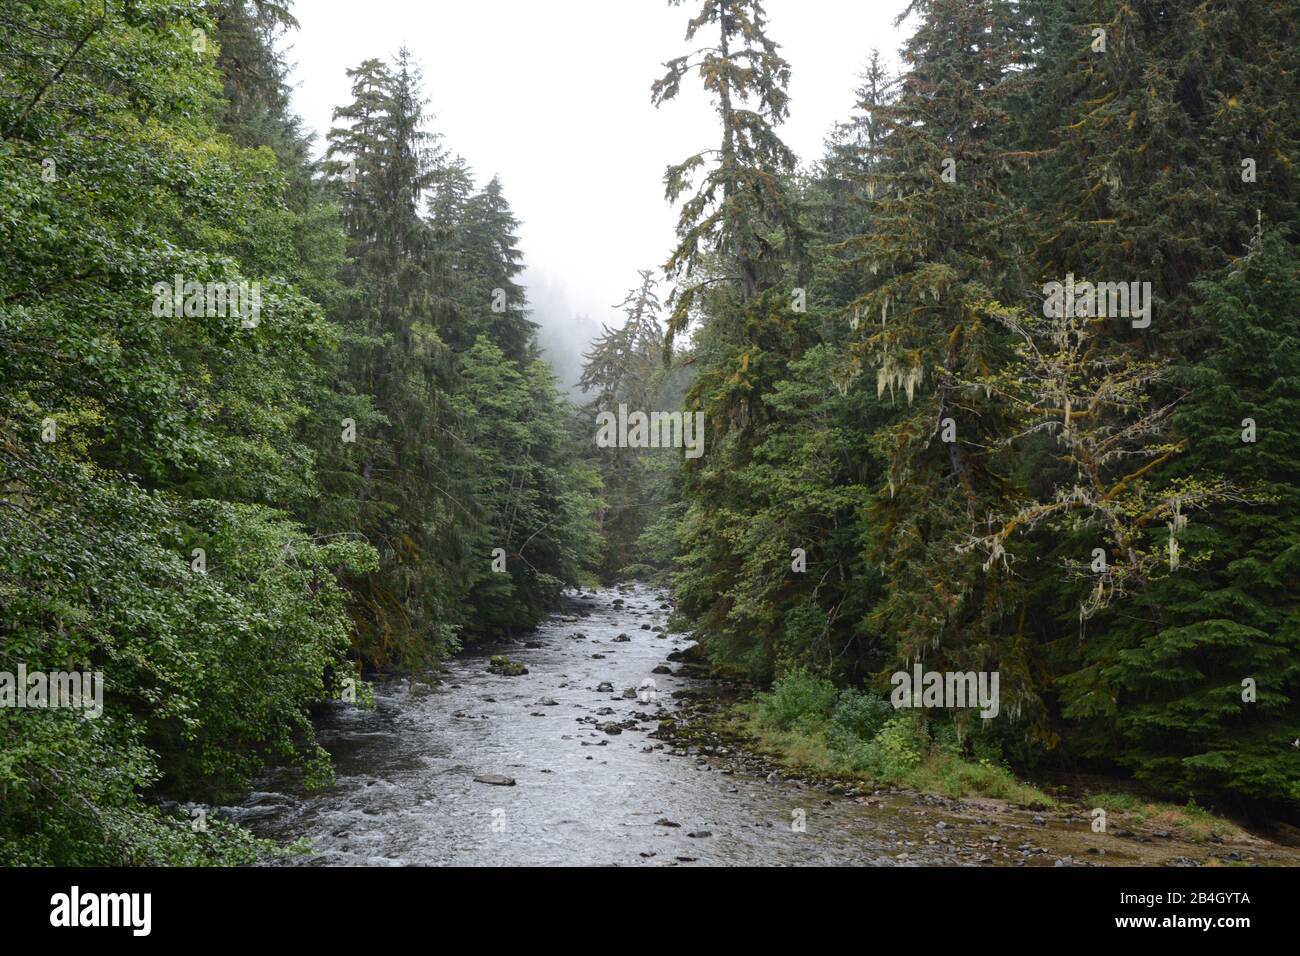 A creek system running through the coastal temperate rainforest in Nisga'a First Nation territory, near Gingolx, northern British Columbia, Canada. Stock Photo